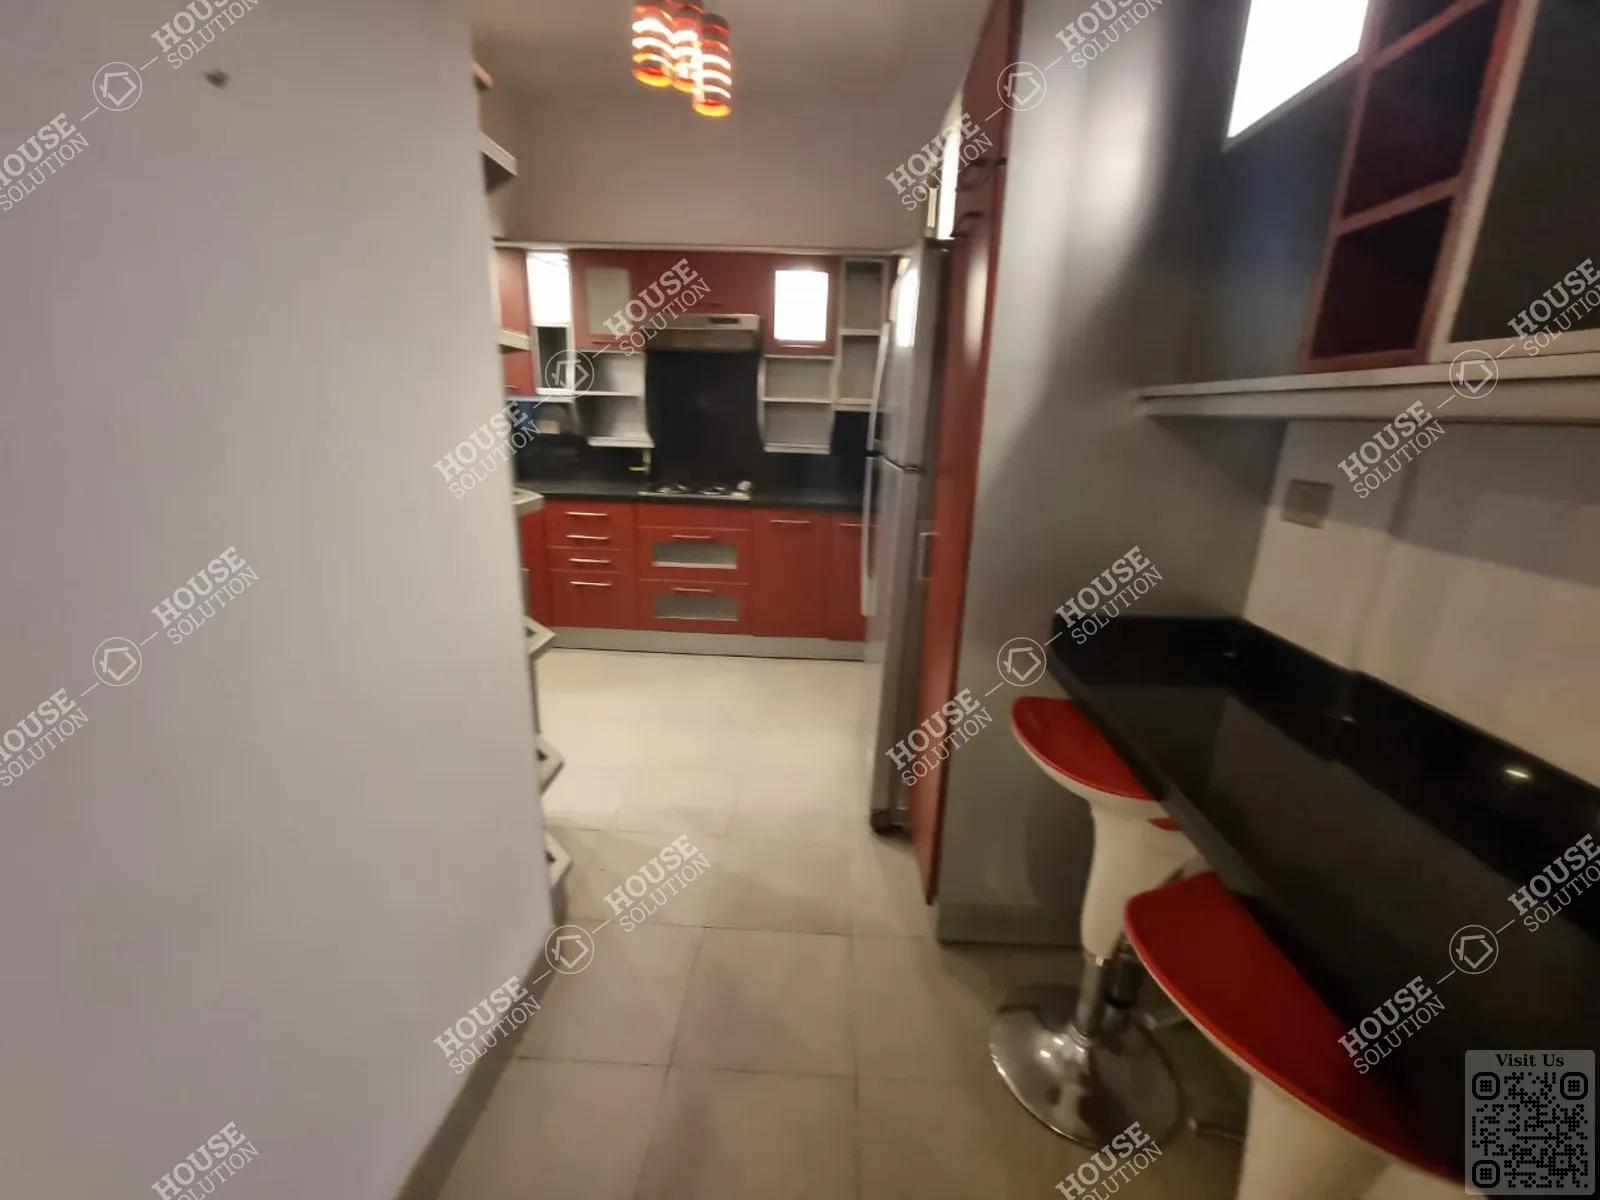 KITCHEN  @ Apartments For Rent In Maadi Maadi Sarayat Area: 120 m² consists of 2 Bedrooms 3 Bathrooms Modern furnished 5 stars #2891-2